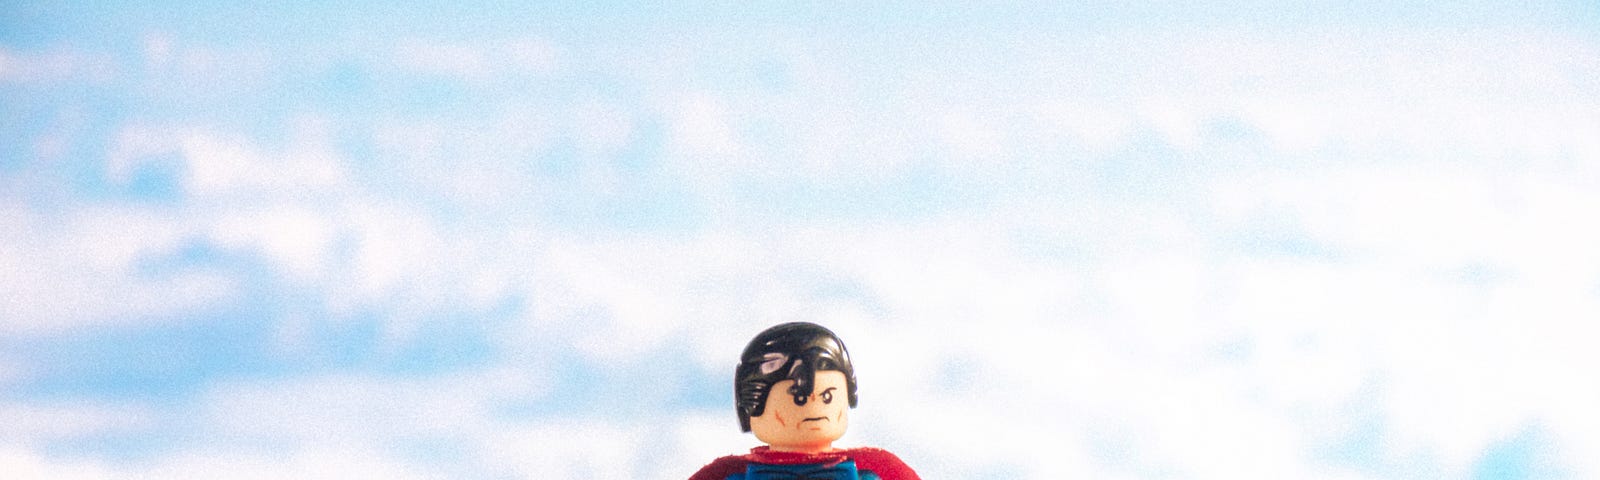 LEGO Superman floating above a sea of clouds.